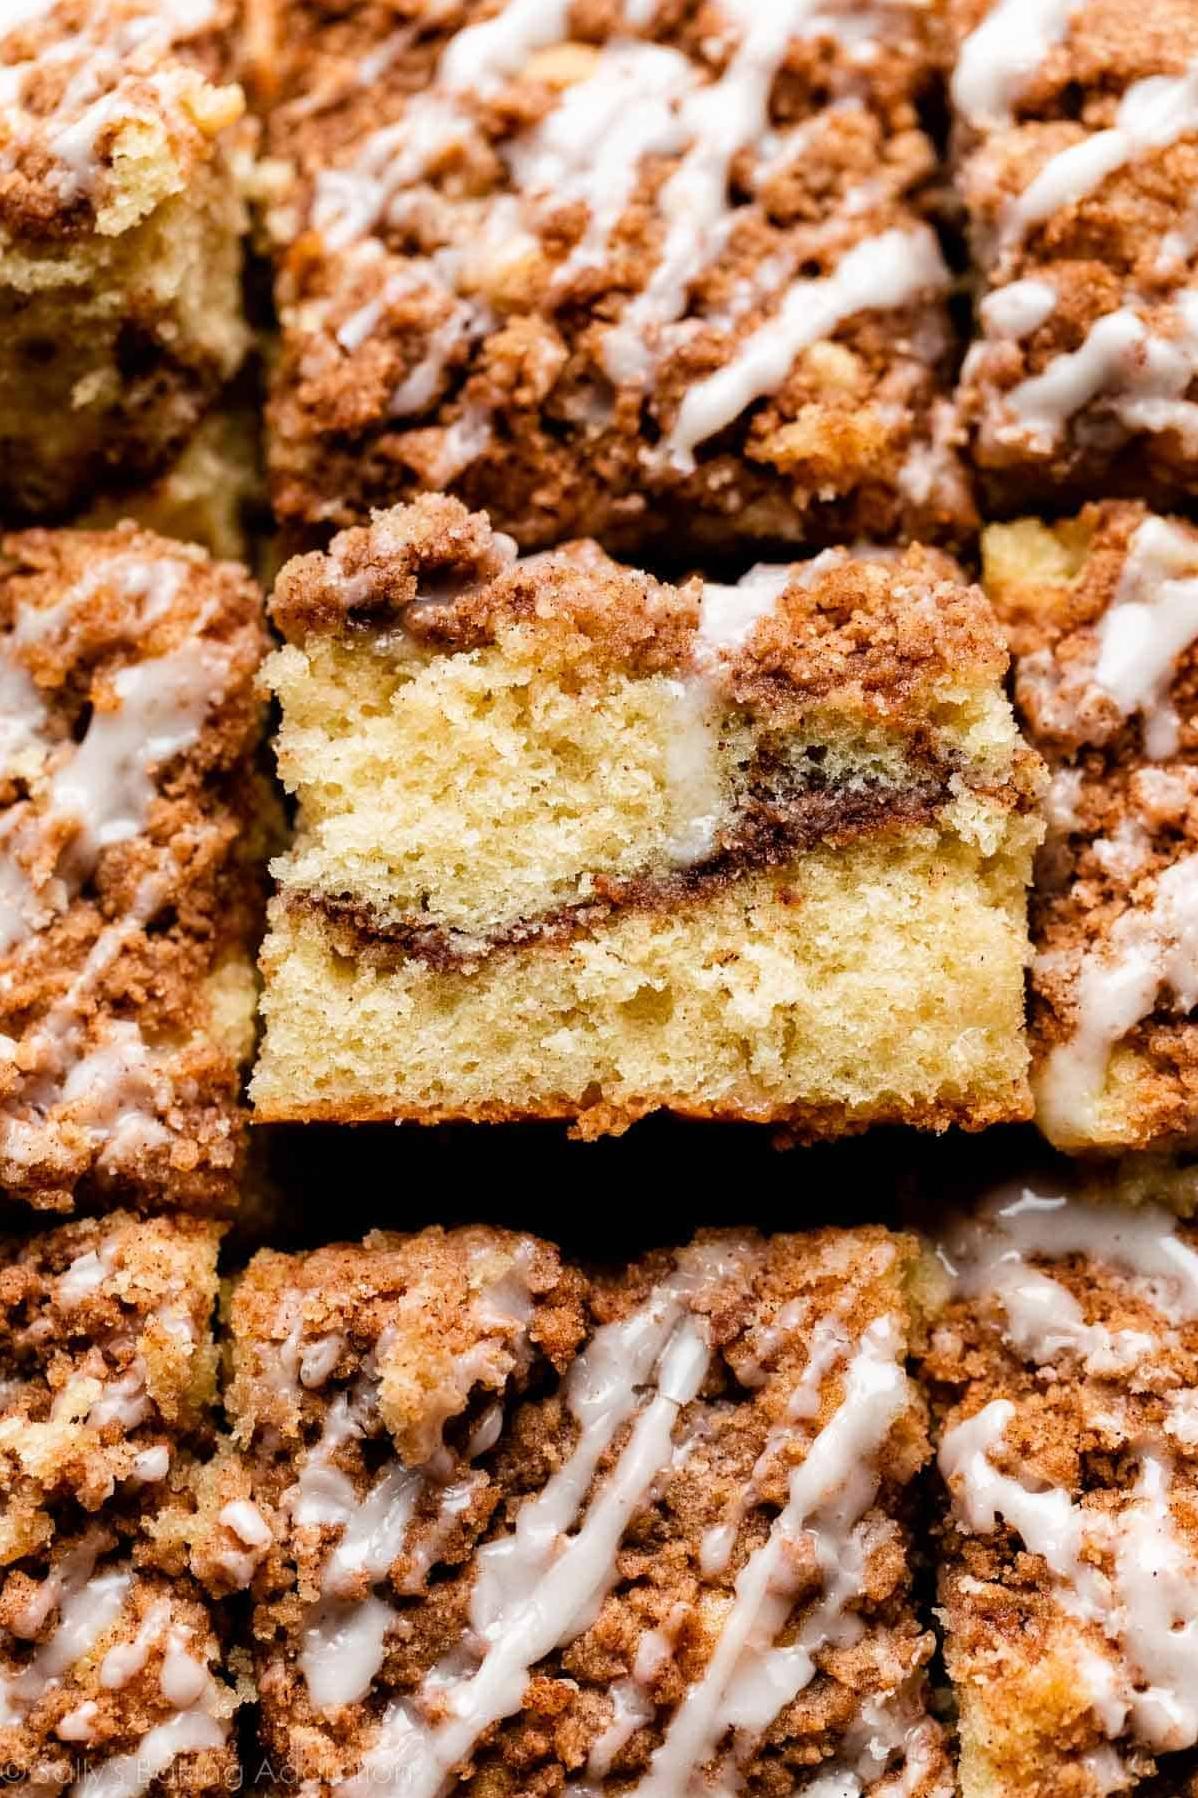  This cake is so good, you might want to skip the caffeine.